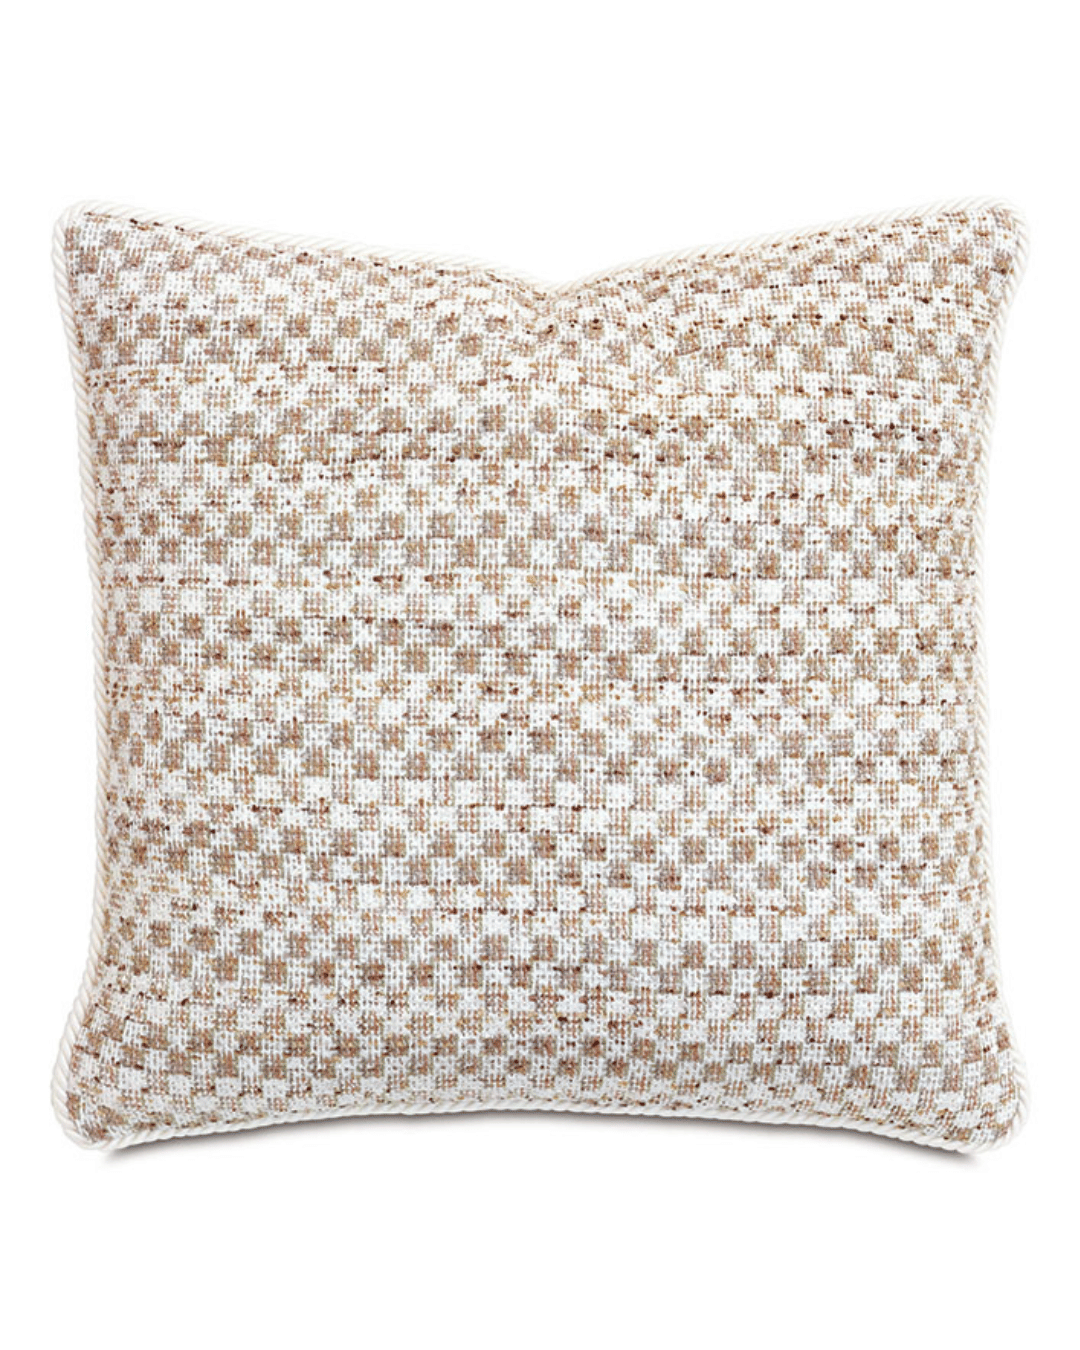 A rectangular Casa Chenille Pillow by Eastern Accents featuring a textured beige and white houndstooth pattern with piped edges, inspired by Scottsdale Arizona aesthetics, isolated on a white background.